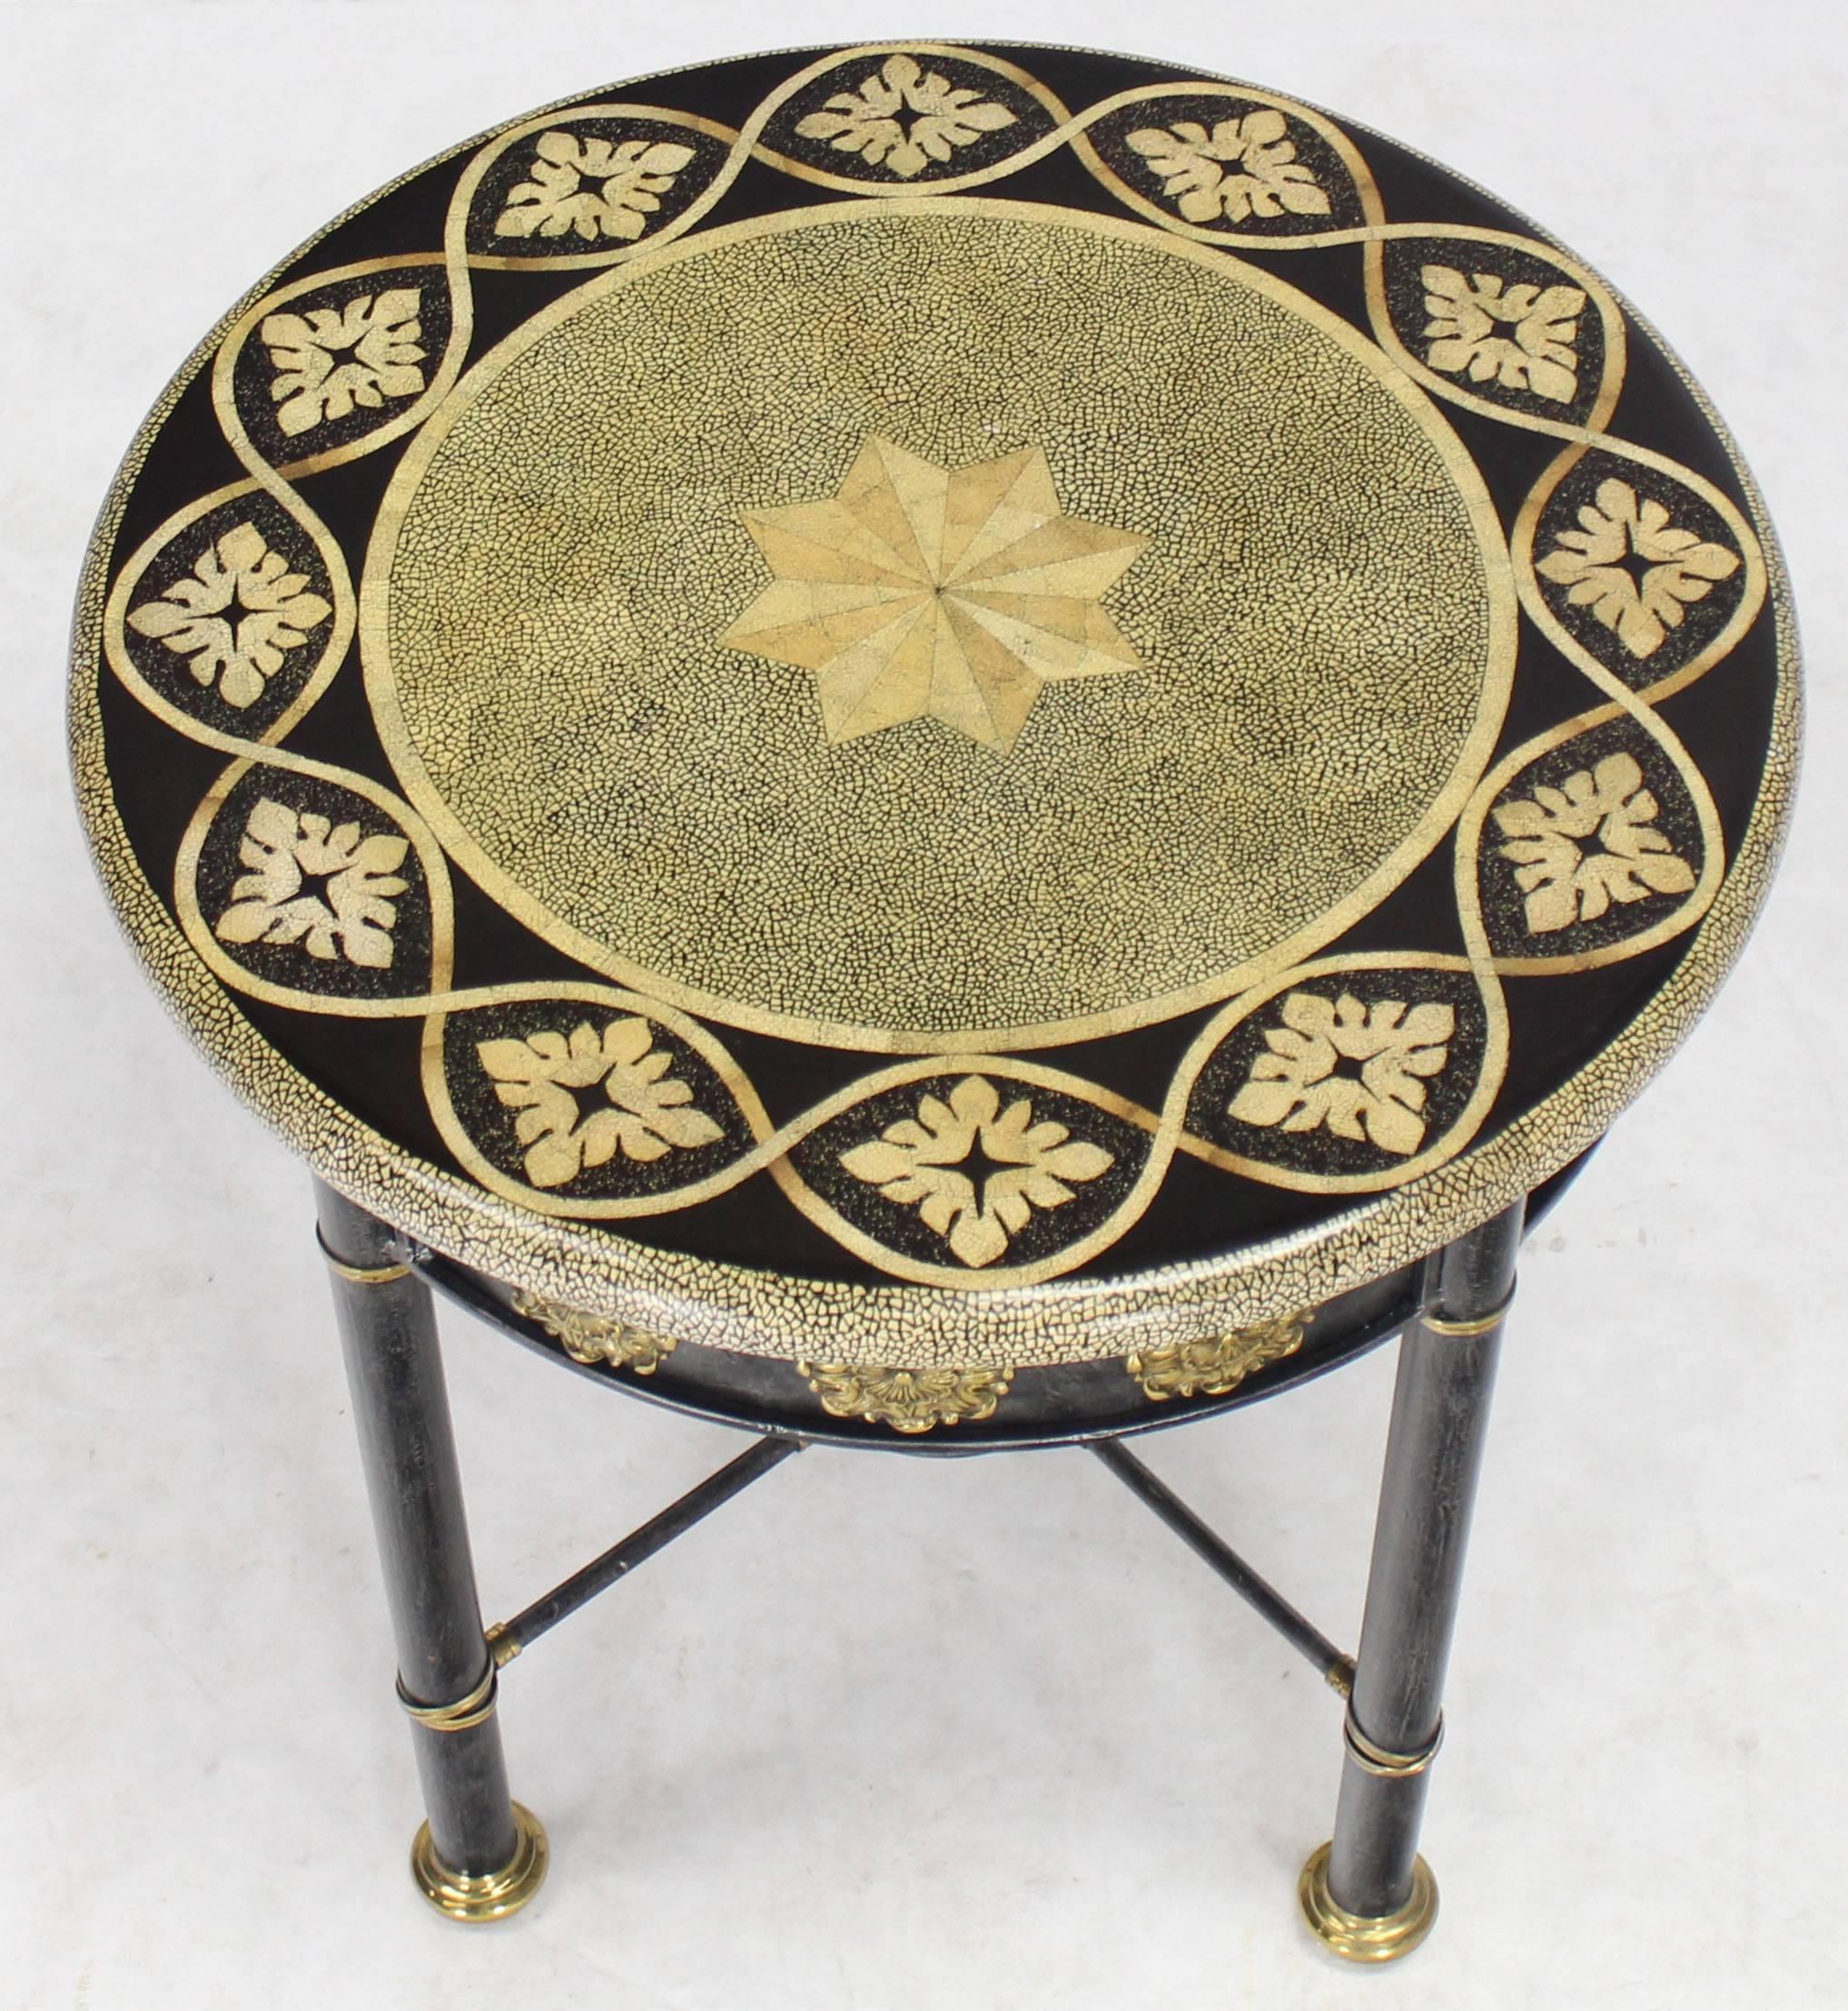 Round Faux Egg Shell Decorated Bronze Ormolu Decorated Round Gueridon Table In Excellent Condition For Sale In Rockaway, NJ